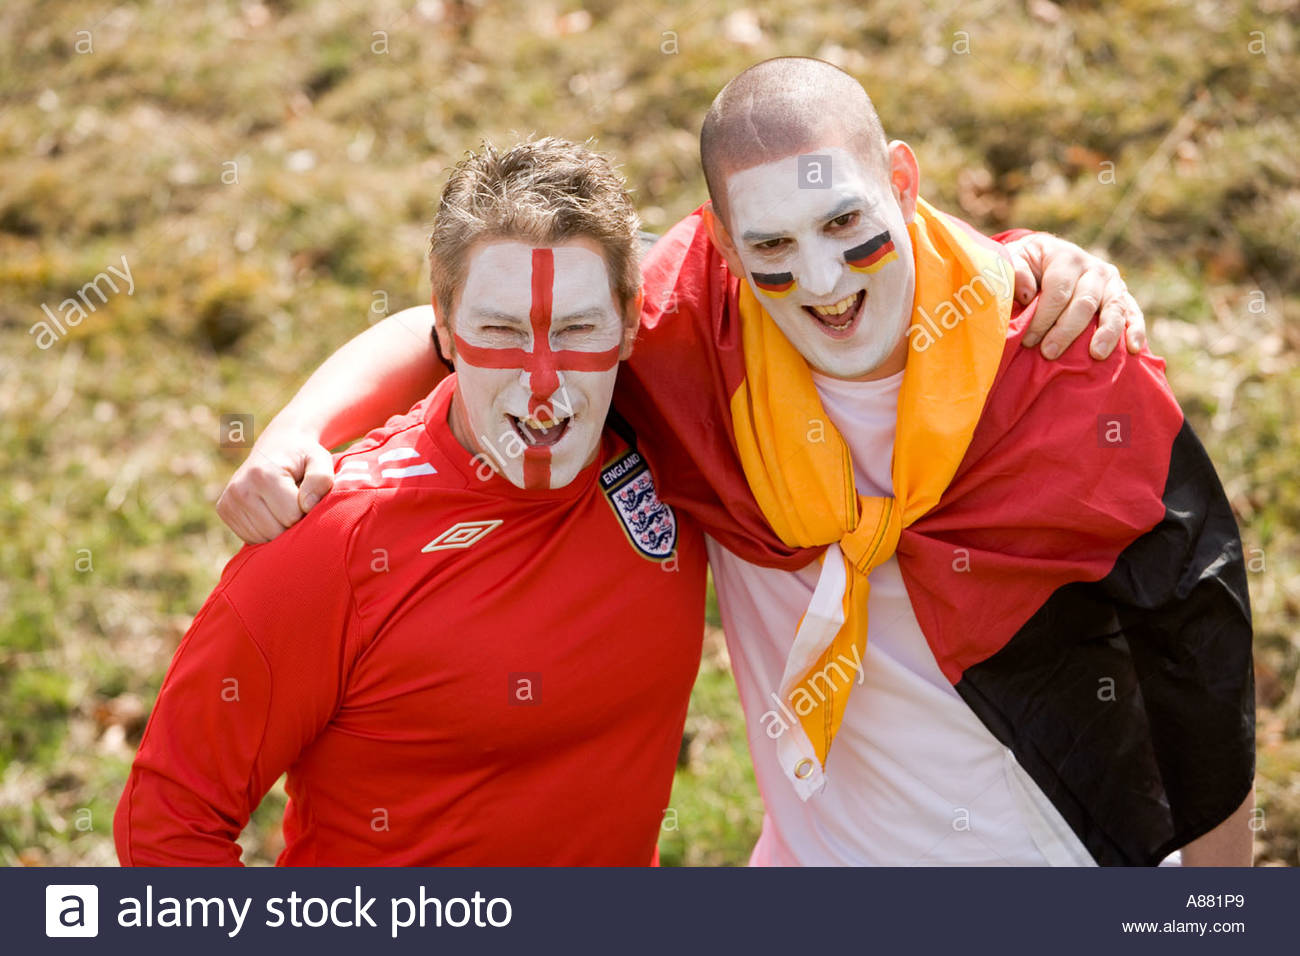 england-and-german-football-fans-embracing-each-other-in-good-spirit-A881P9.jpg